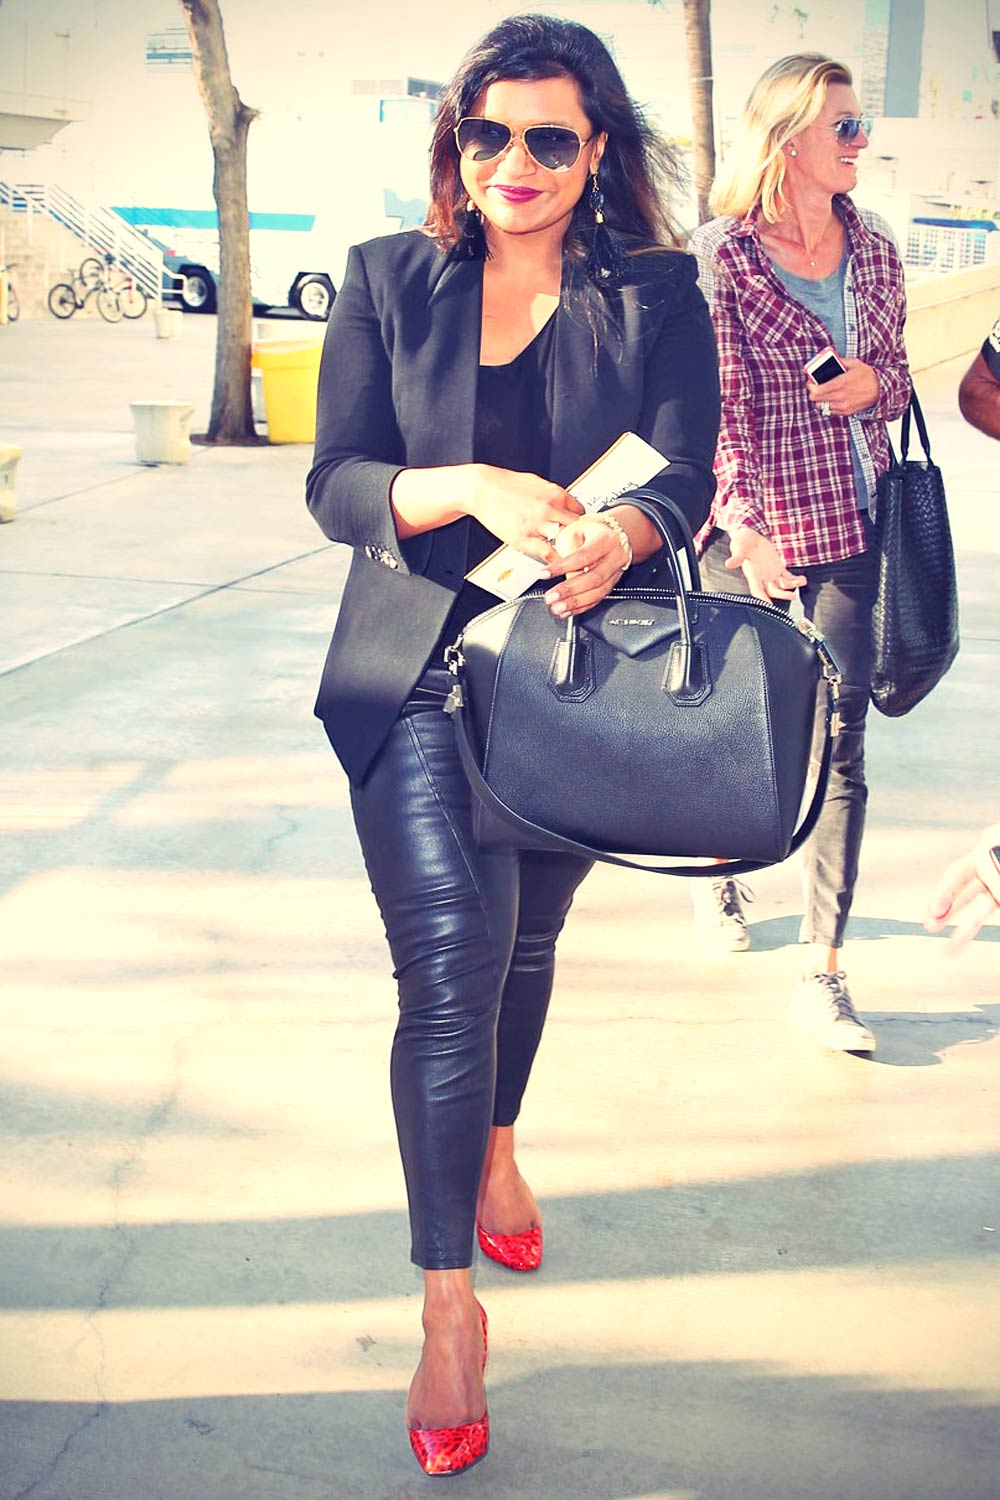 Mindy Kaling arriving at the Staples Center